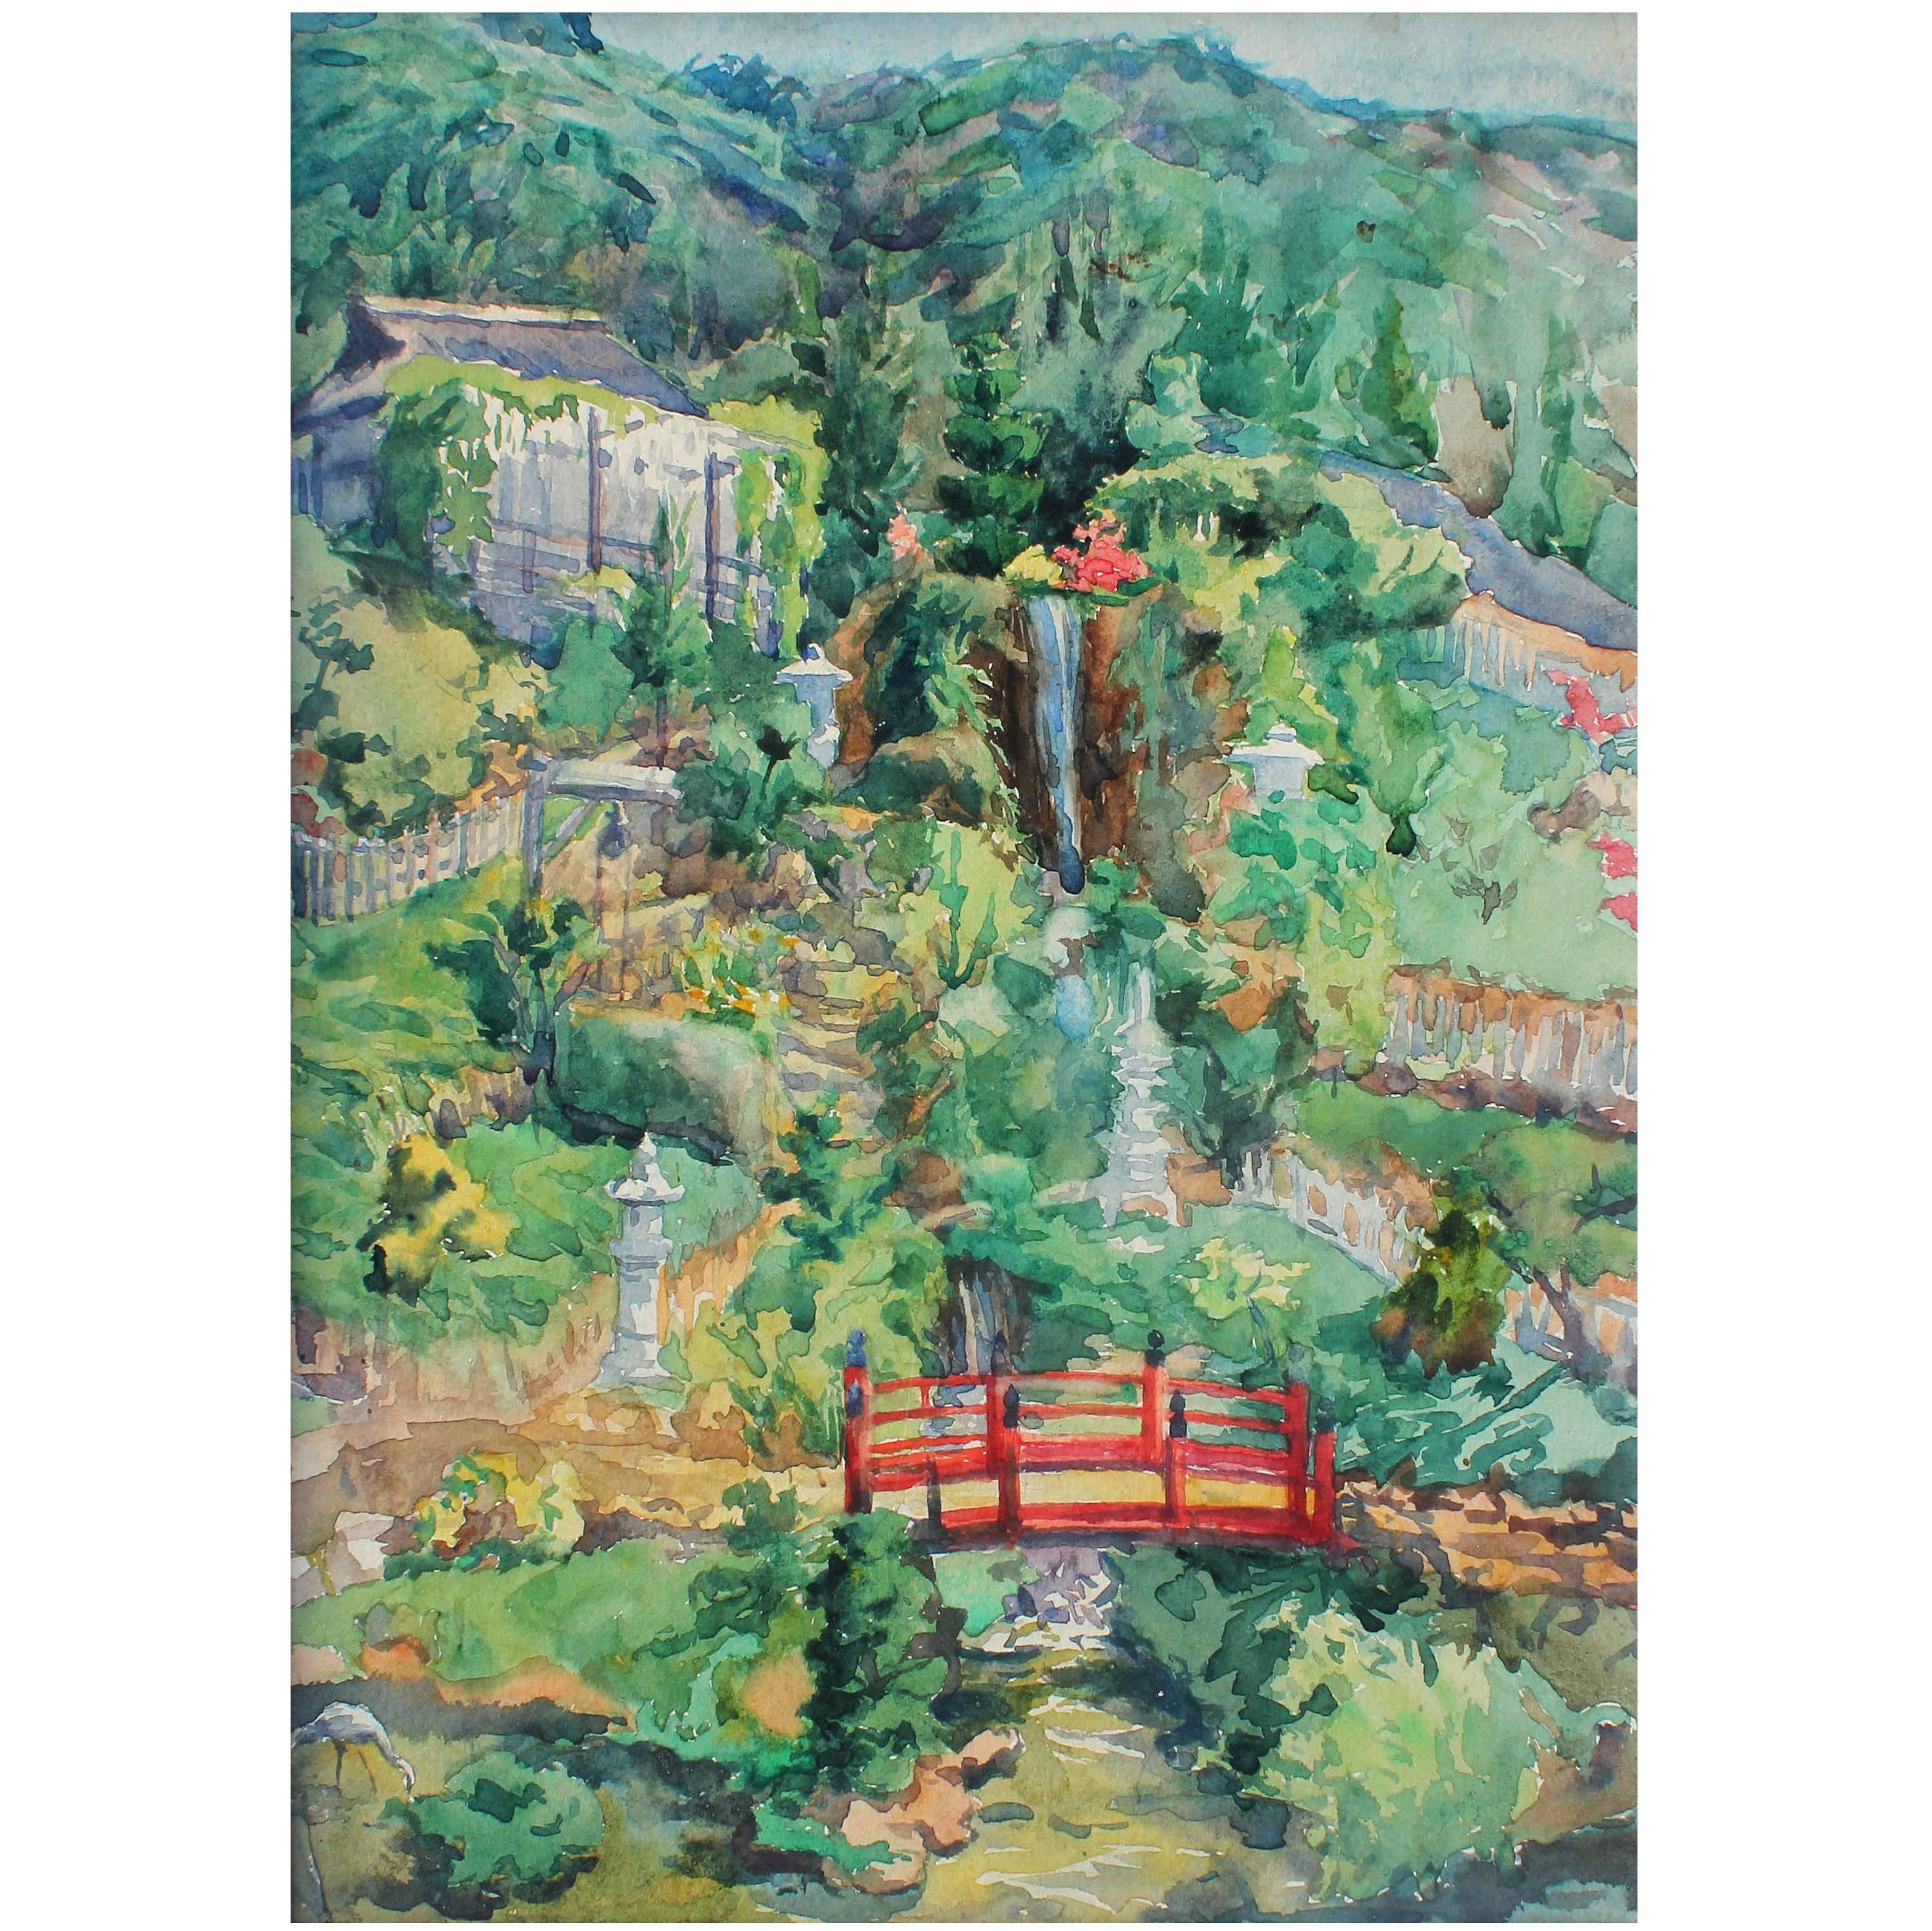 Pair of antique paintings. Watercolors of the Japanese gardens at Wattles Mansion, Los Angeles, California. Painted by Elizabeth Gowdy Baker circa 1915. Matted. Unframed. Estate stamp on reverse. 

Elizabeth Gowdy Baker was born in Xenia, Ohio in